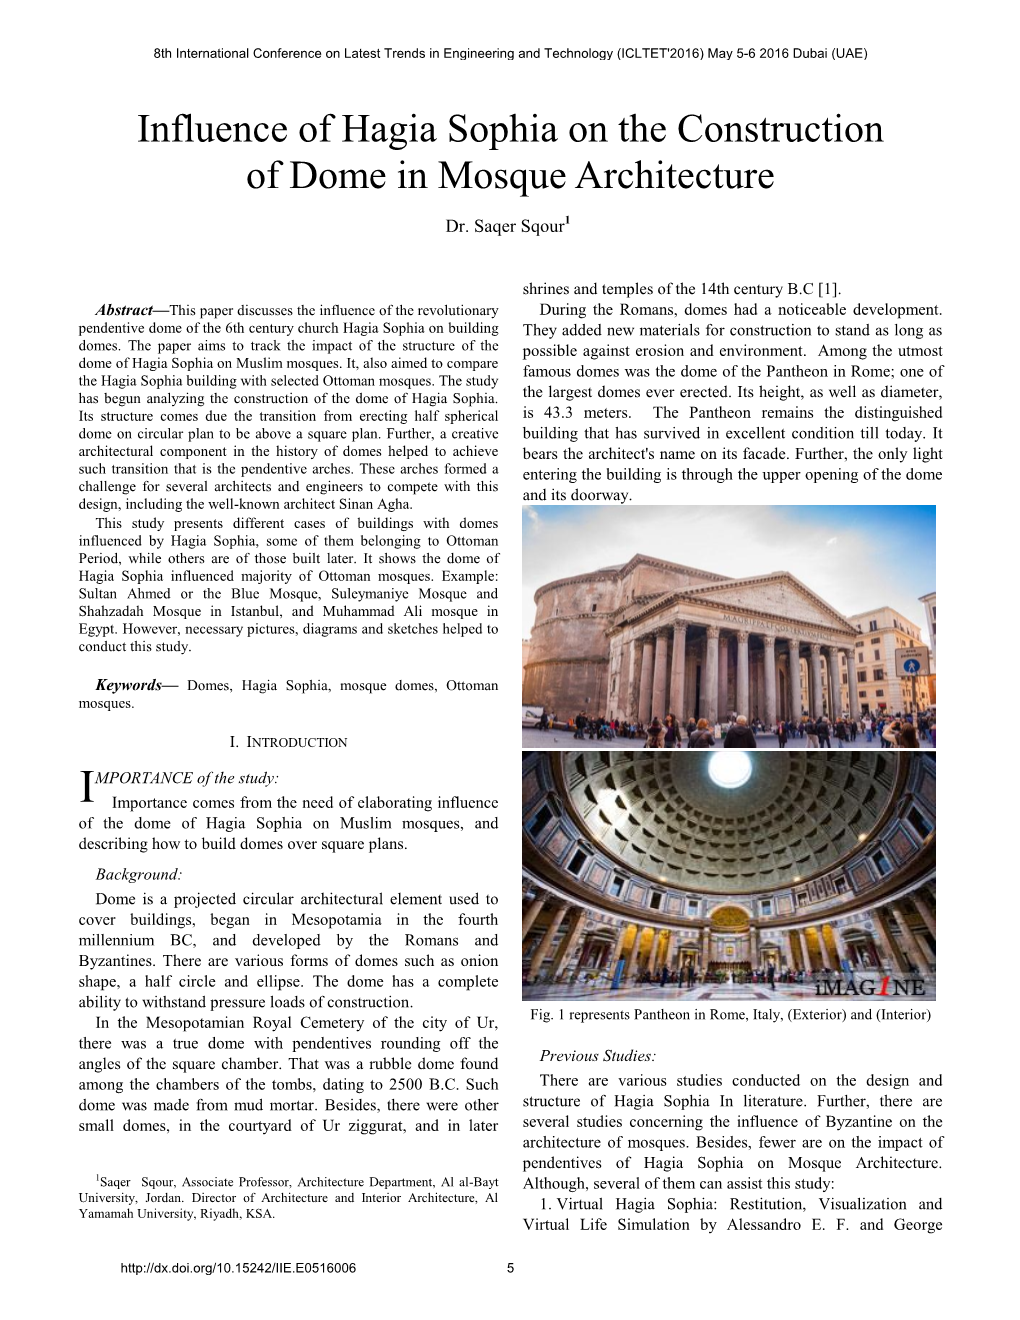 Influence of Hagia Sophia on the Construction of Dome in Mosque Architecture